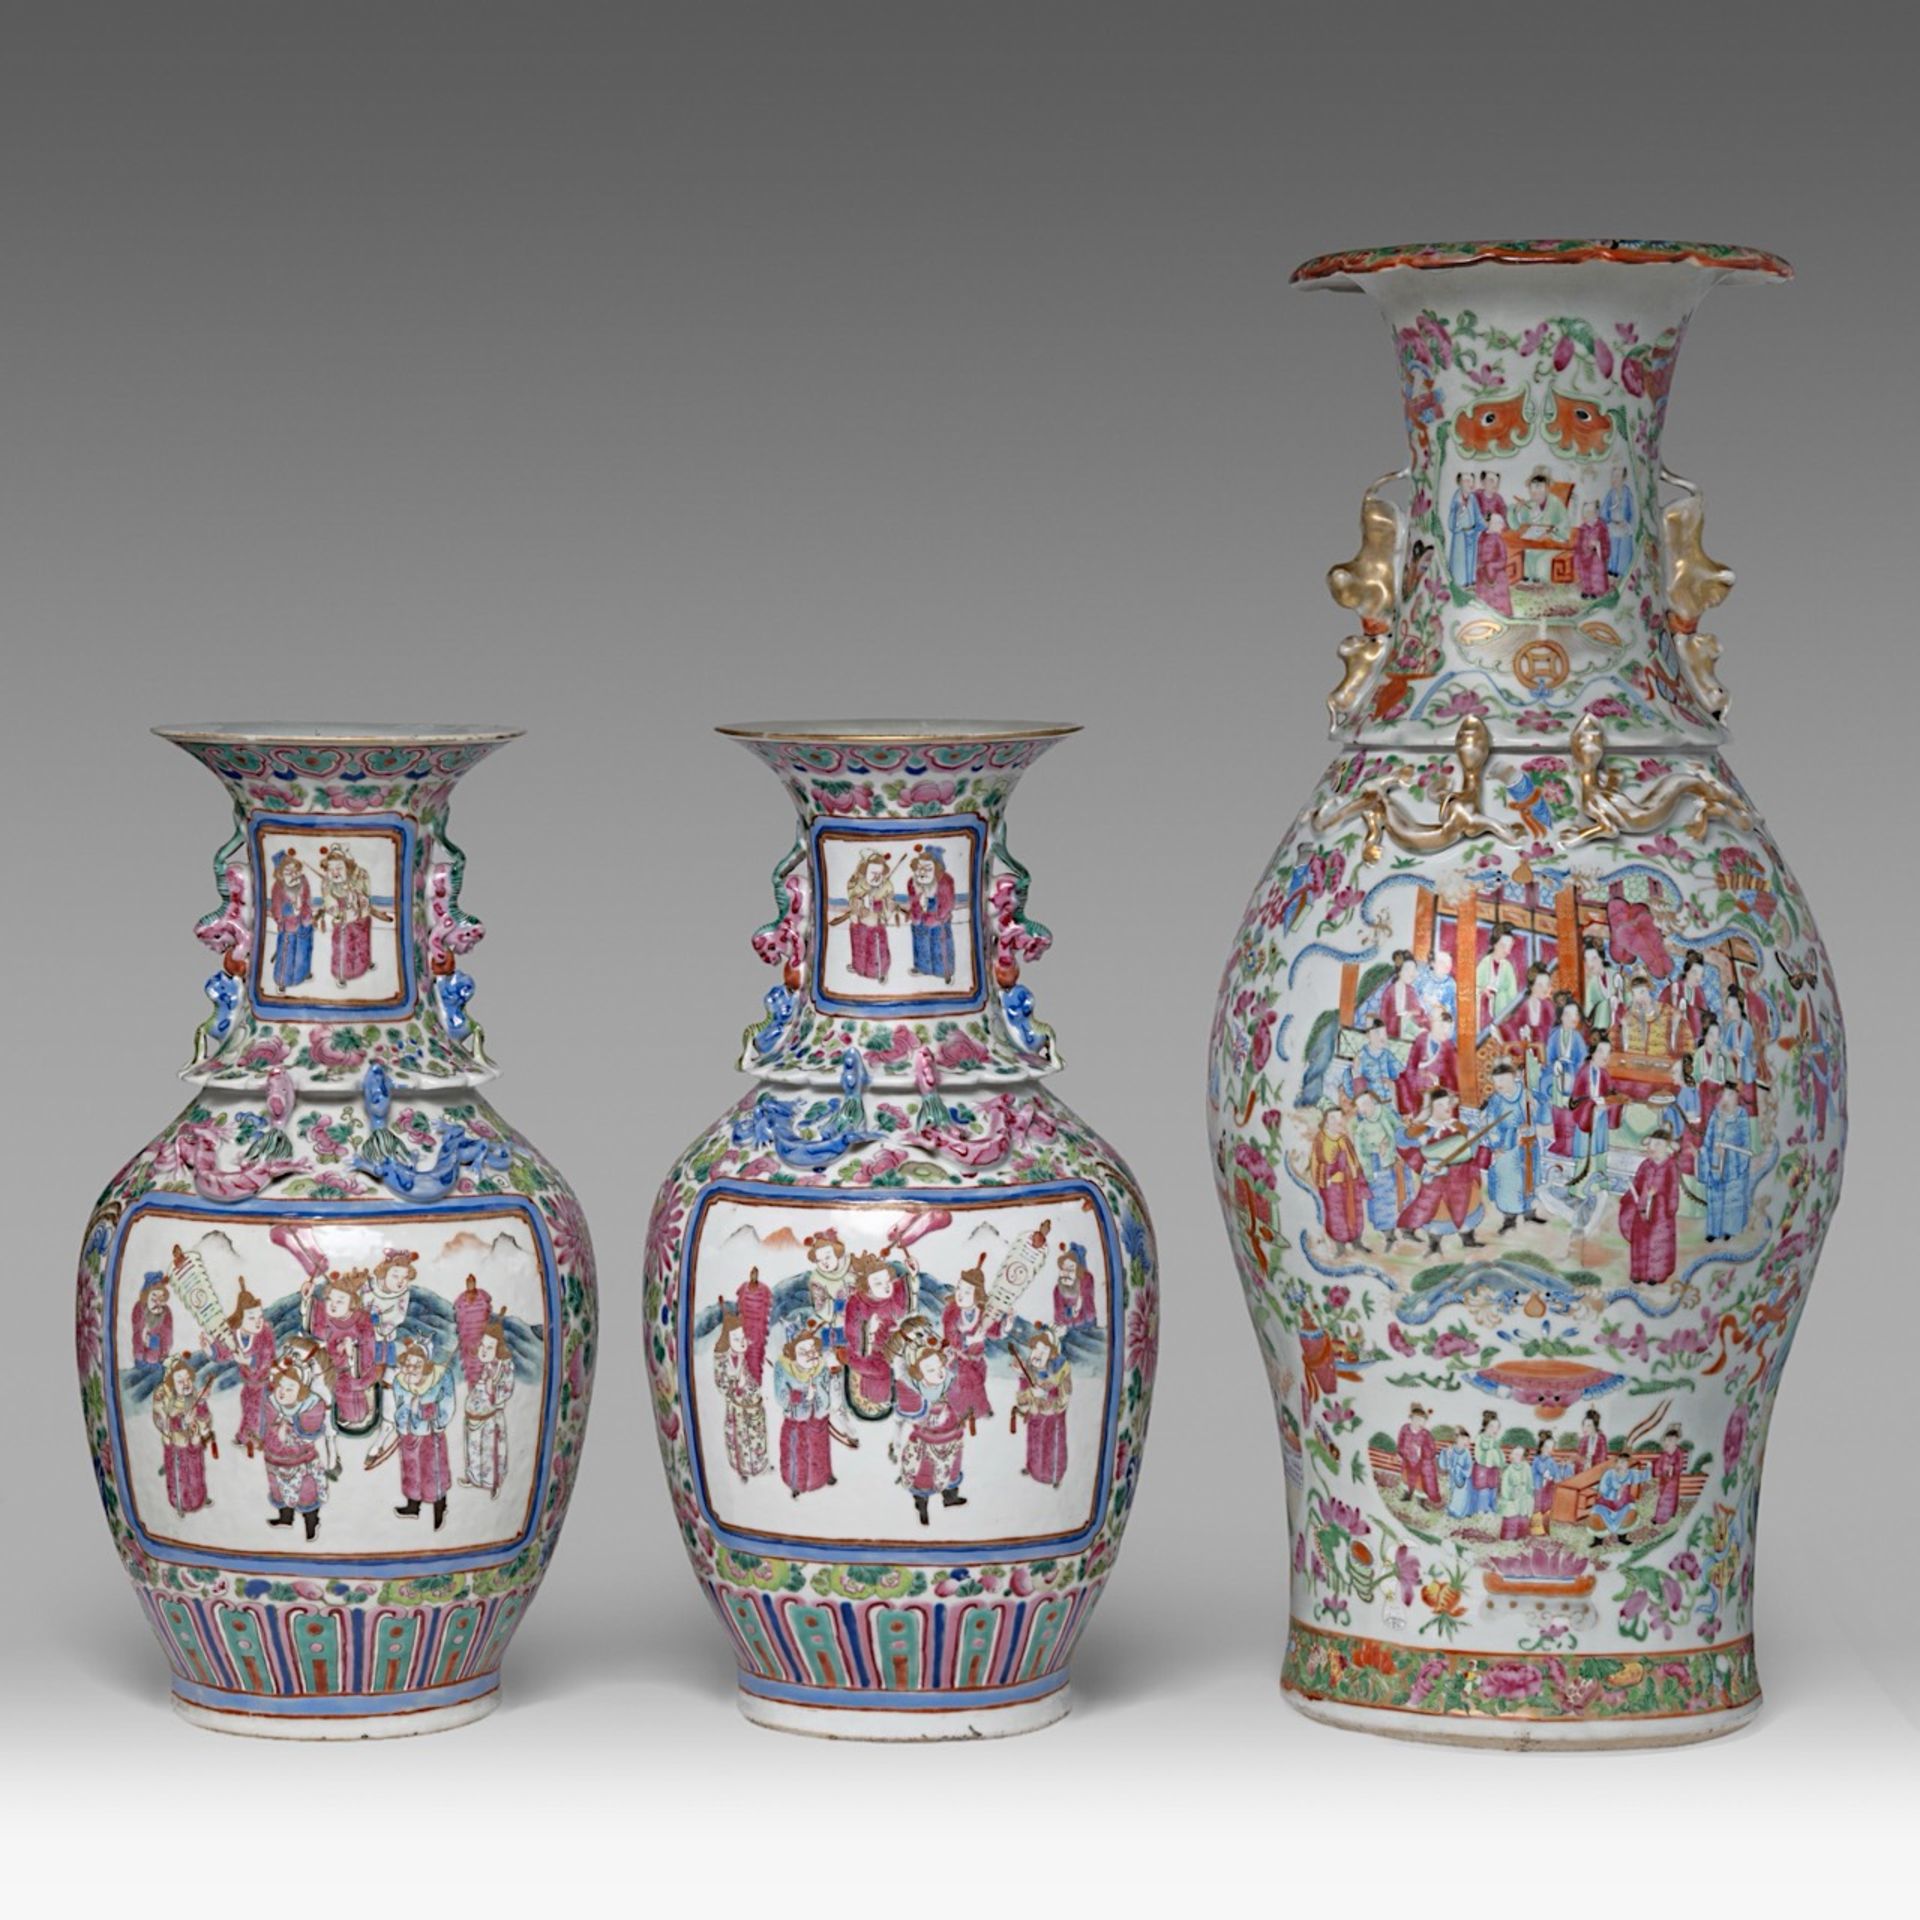 A pair of Chinese famille rose 'Romance of the Three Kingdoms' vases, late 19thC, H 43 cm - added a